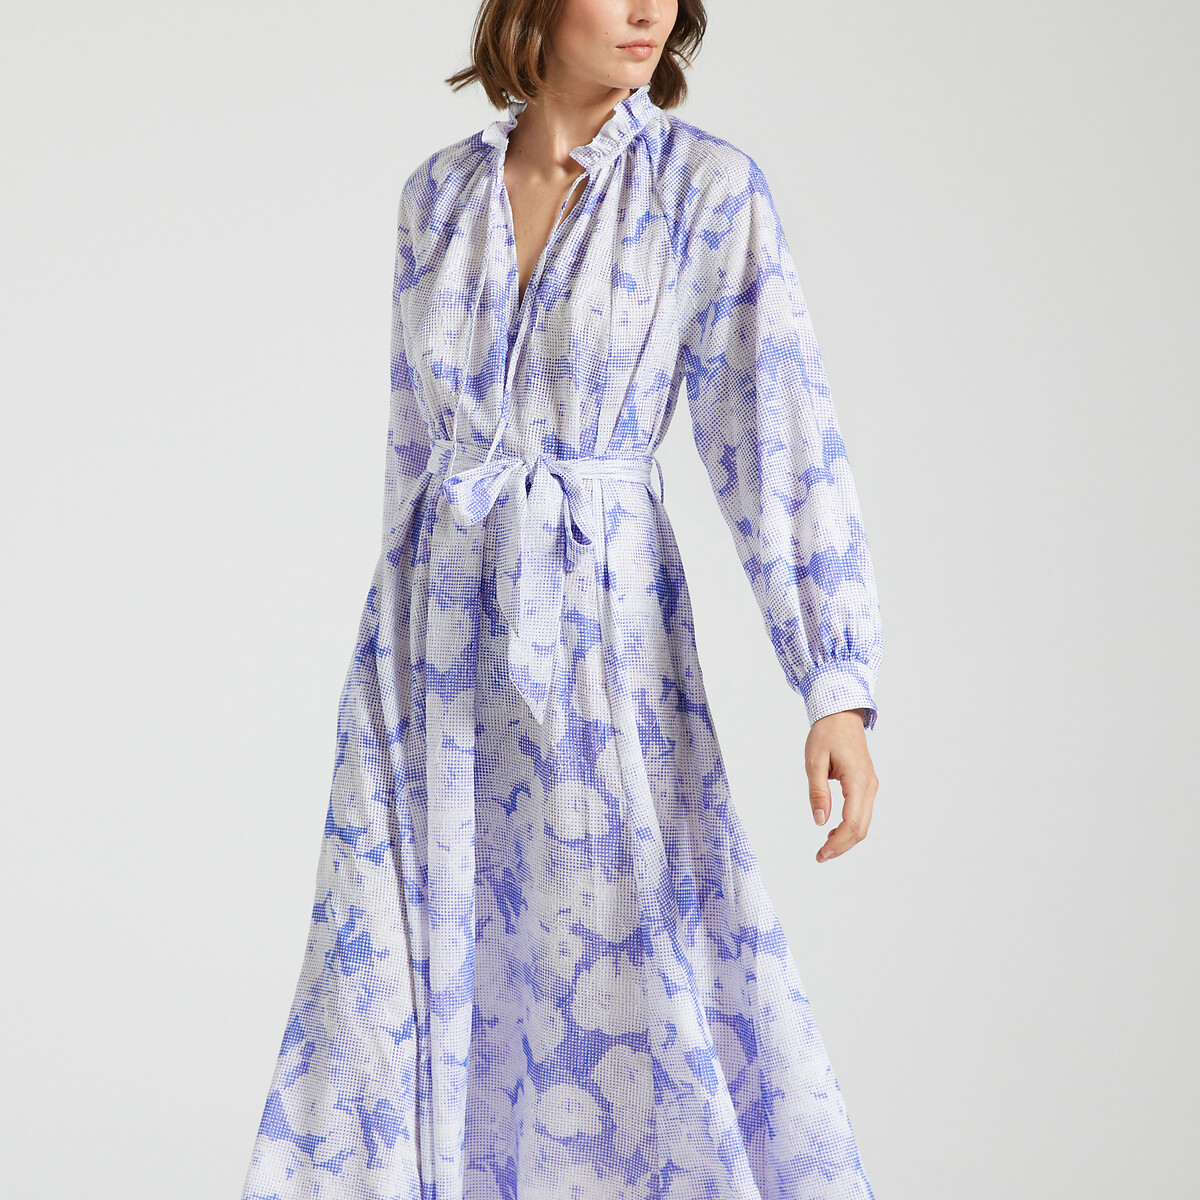 Karookhi Floral Maxi Dress with Pussy Bow and Long Sleeves